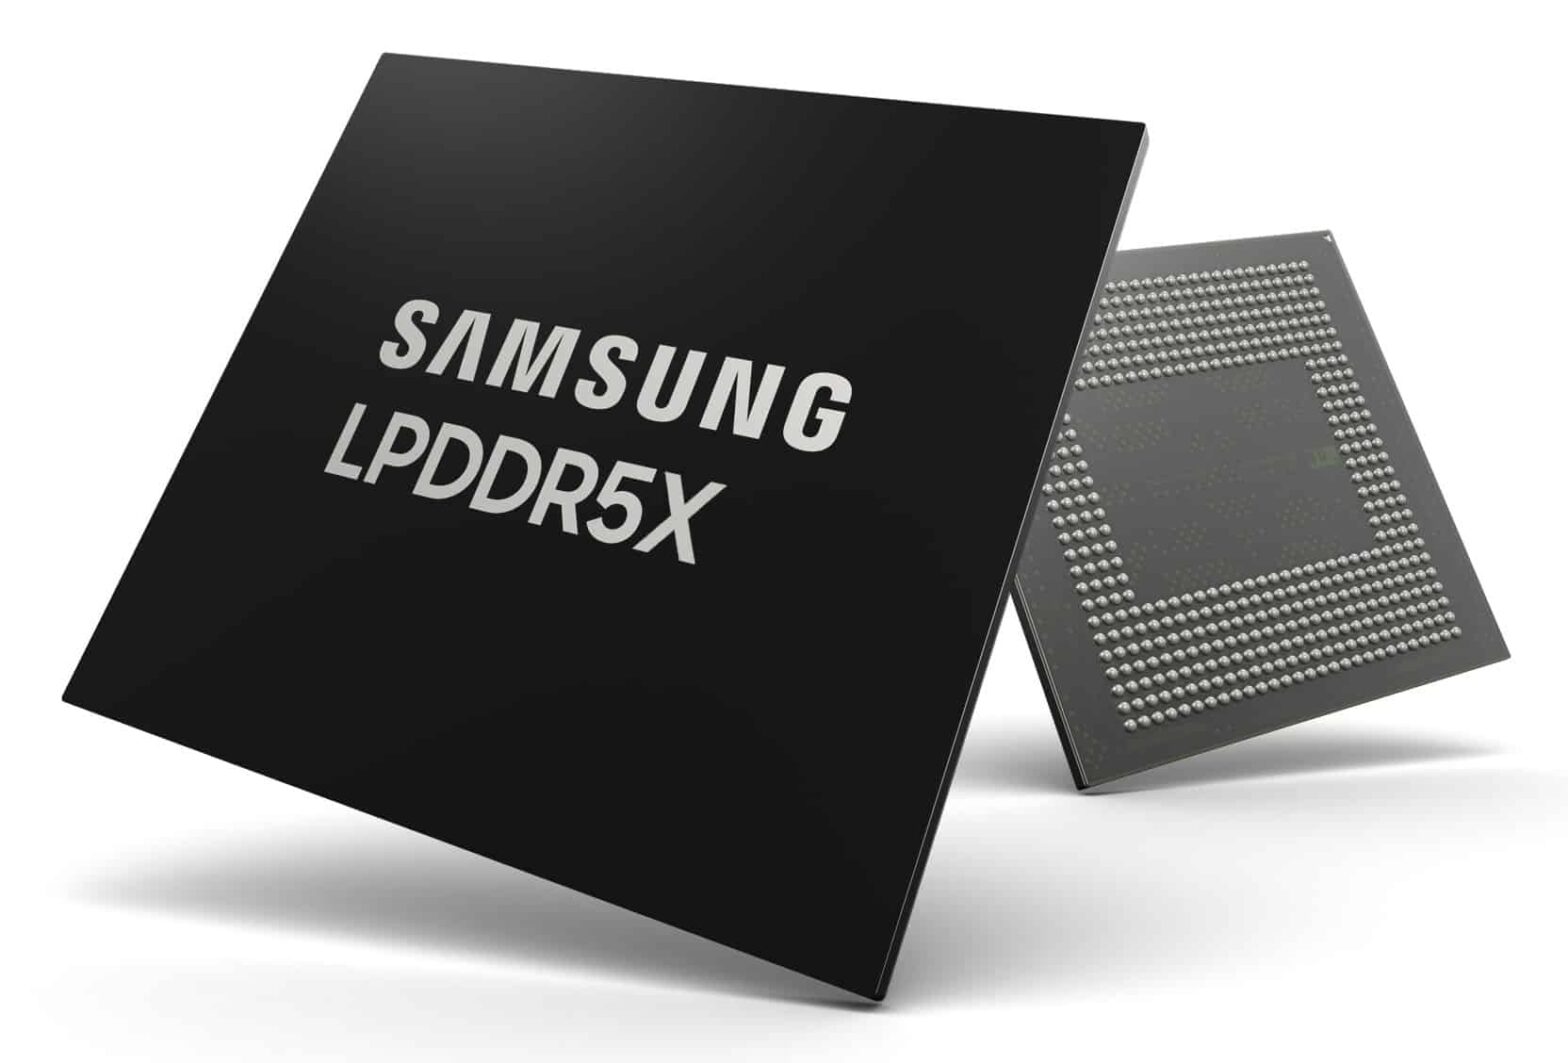 Samsung remains the world's largest memory chip maker